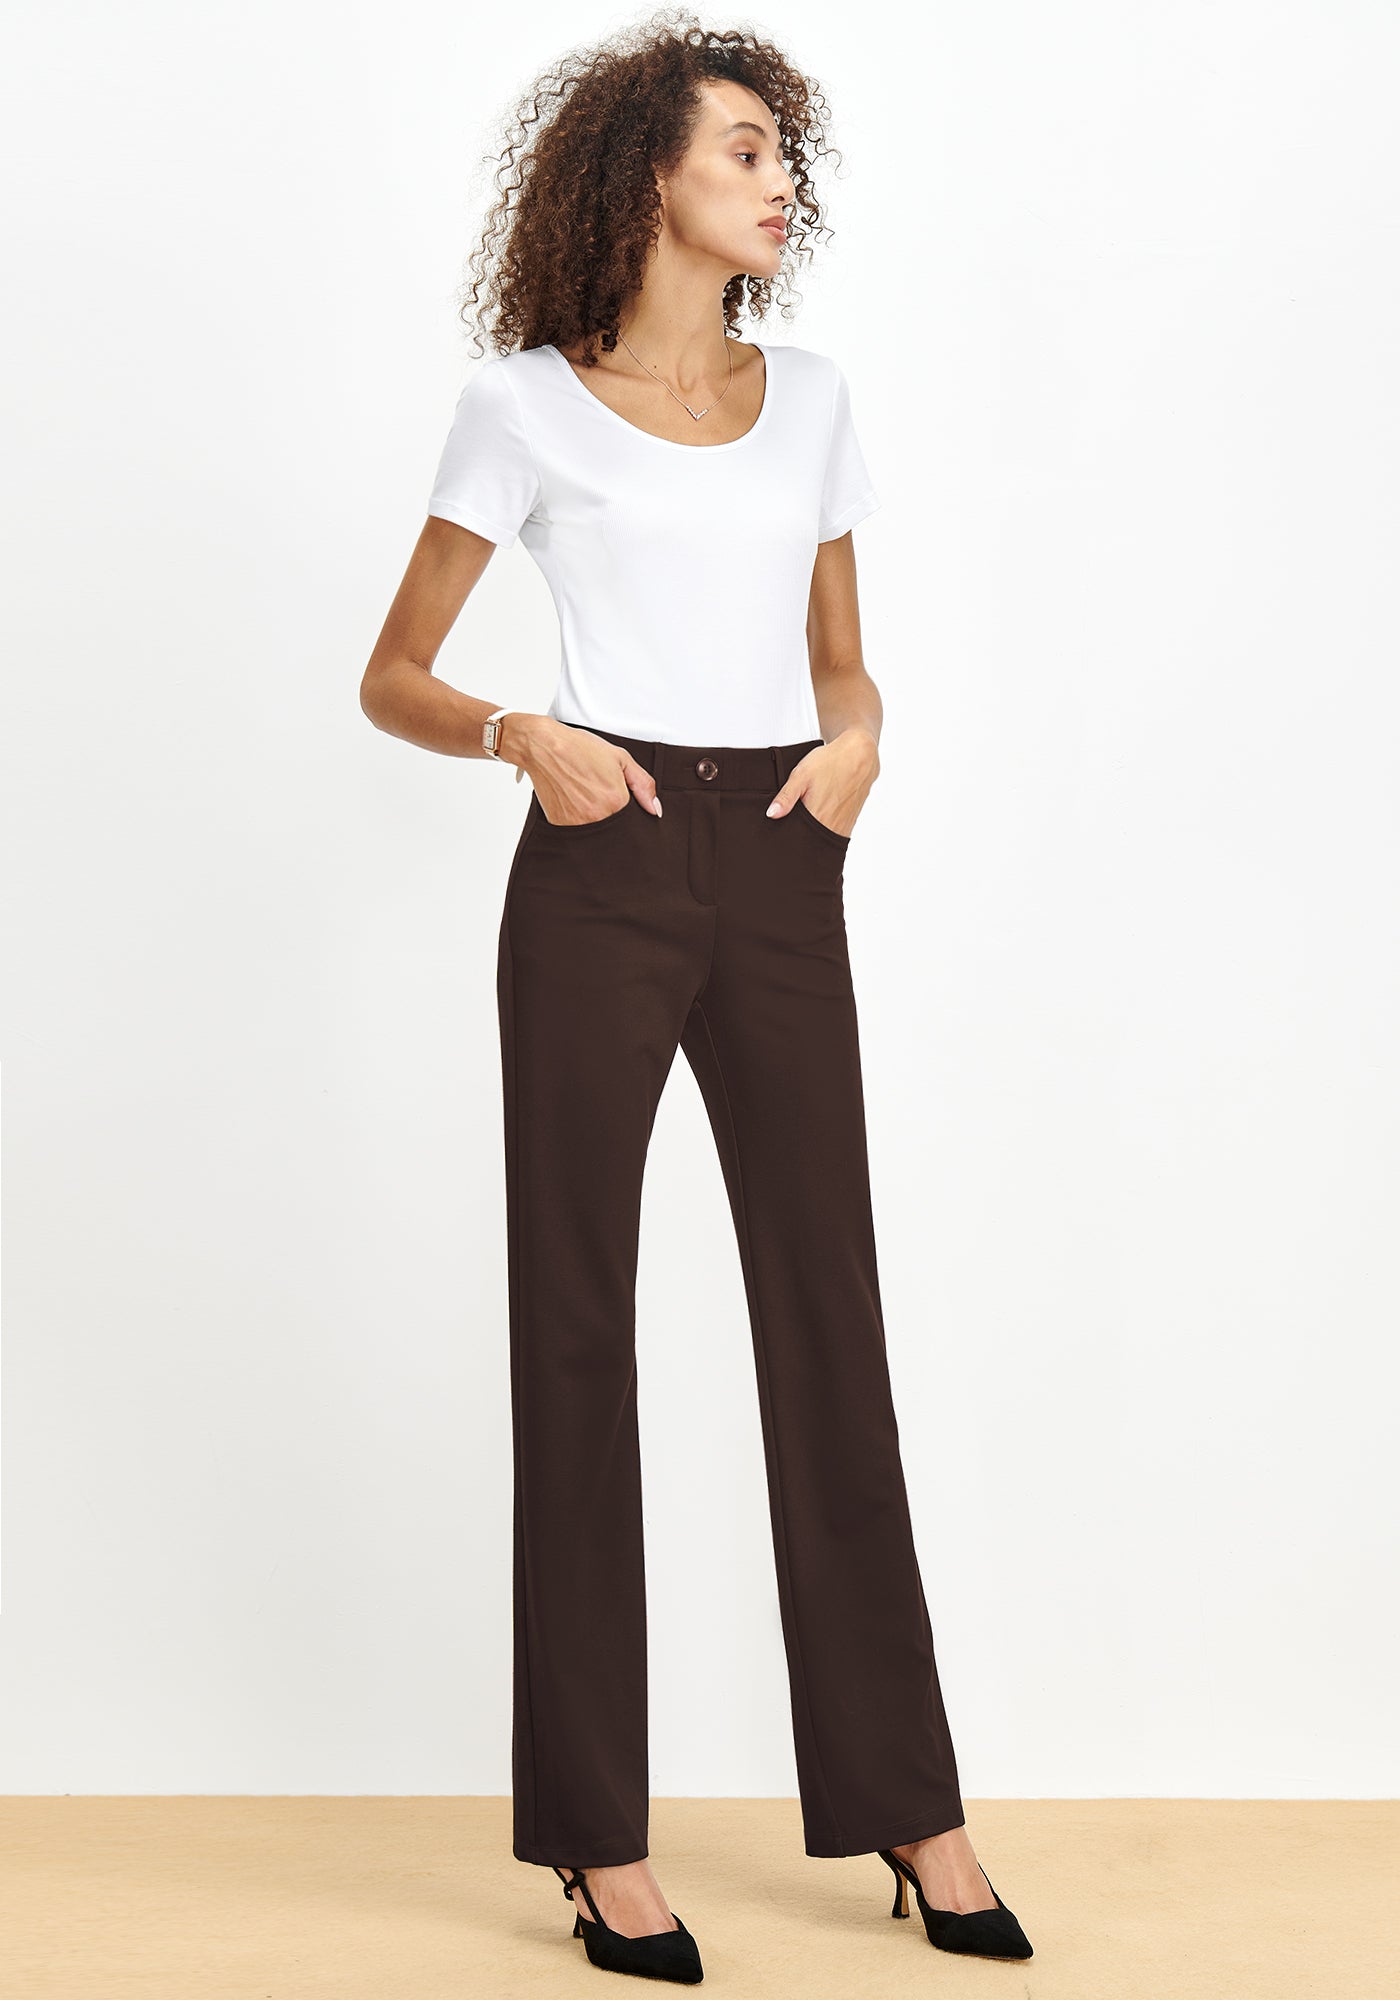 Stretchy Bootcut Dress Pants with 4 Pockets